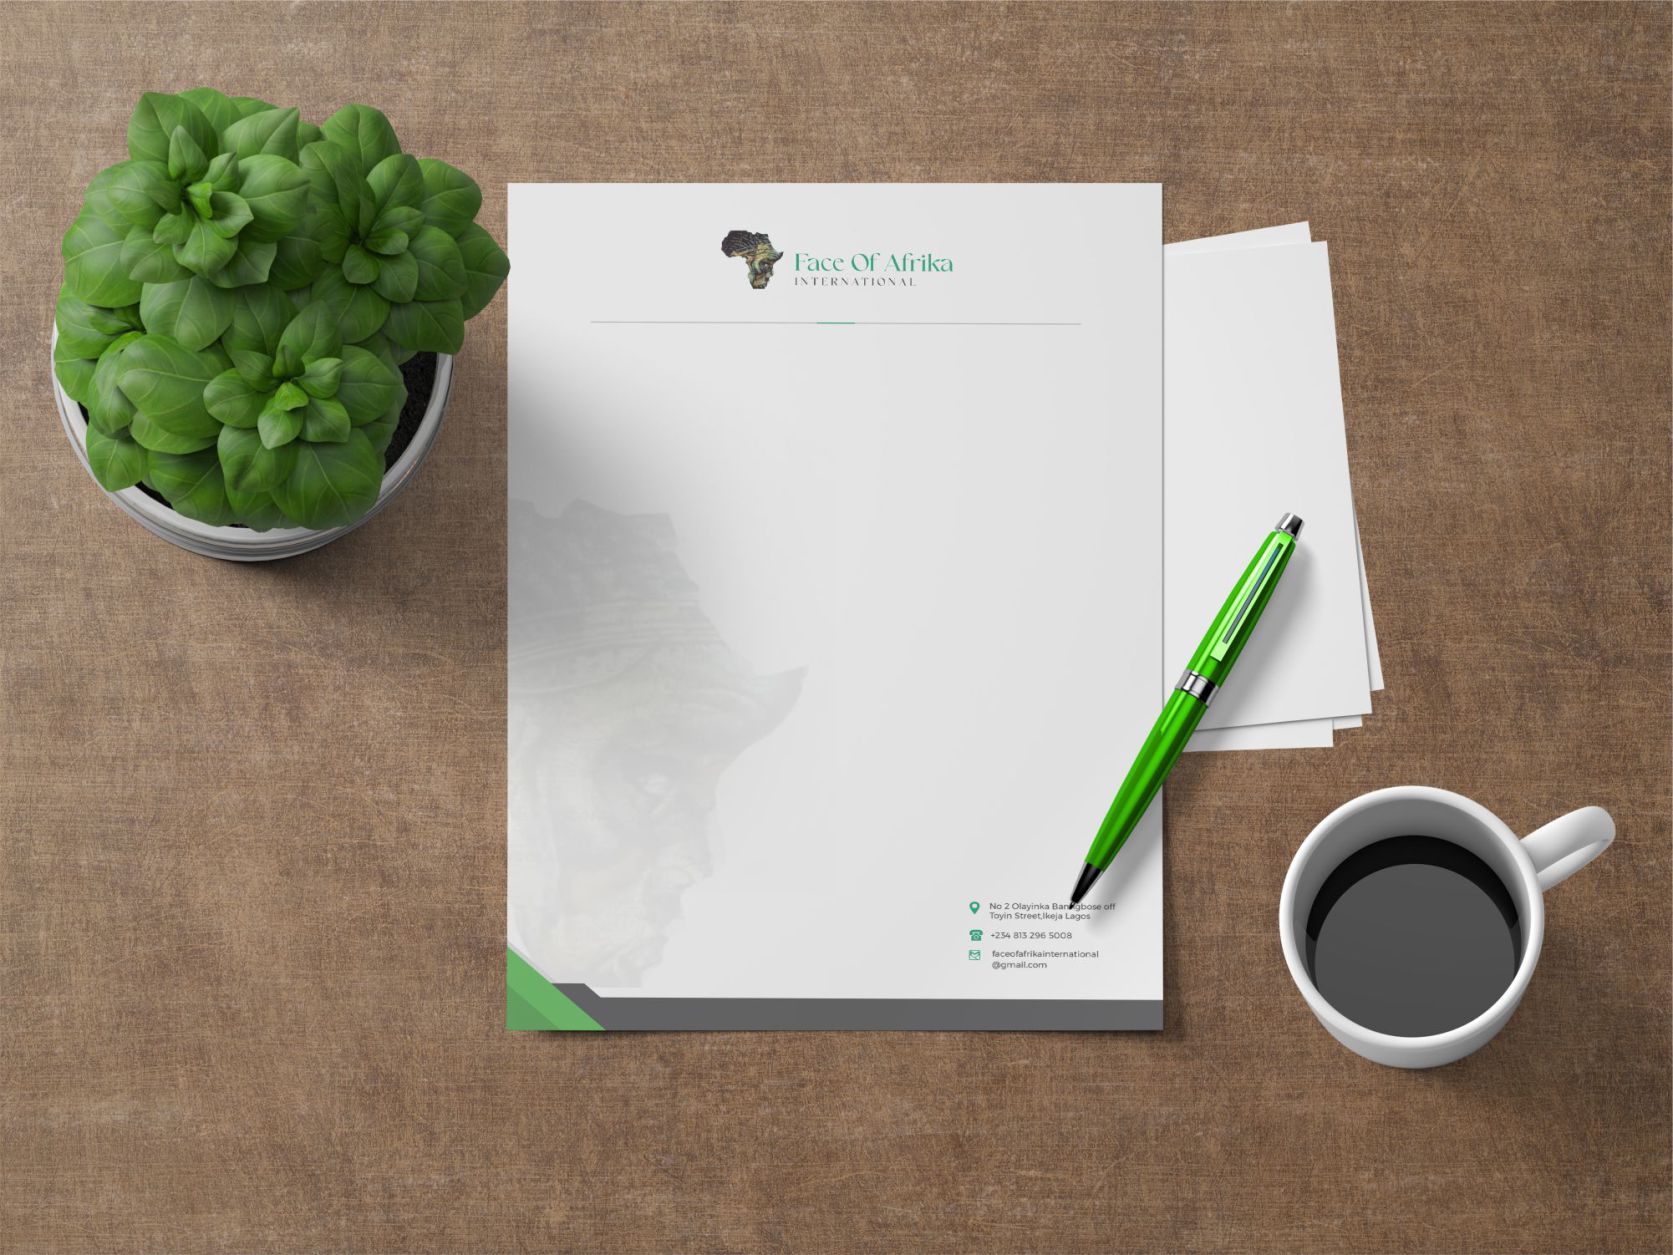 best quality company office letterhead design and printing in lagos, abuja nigeria